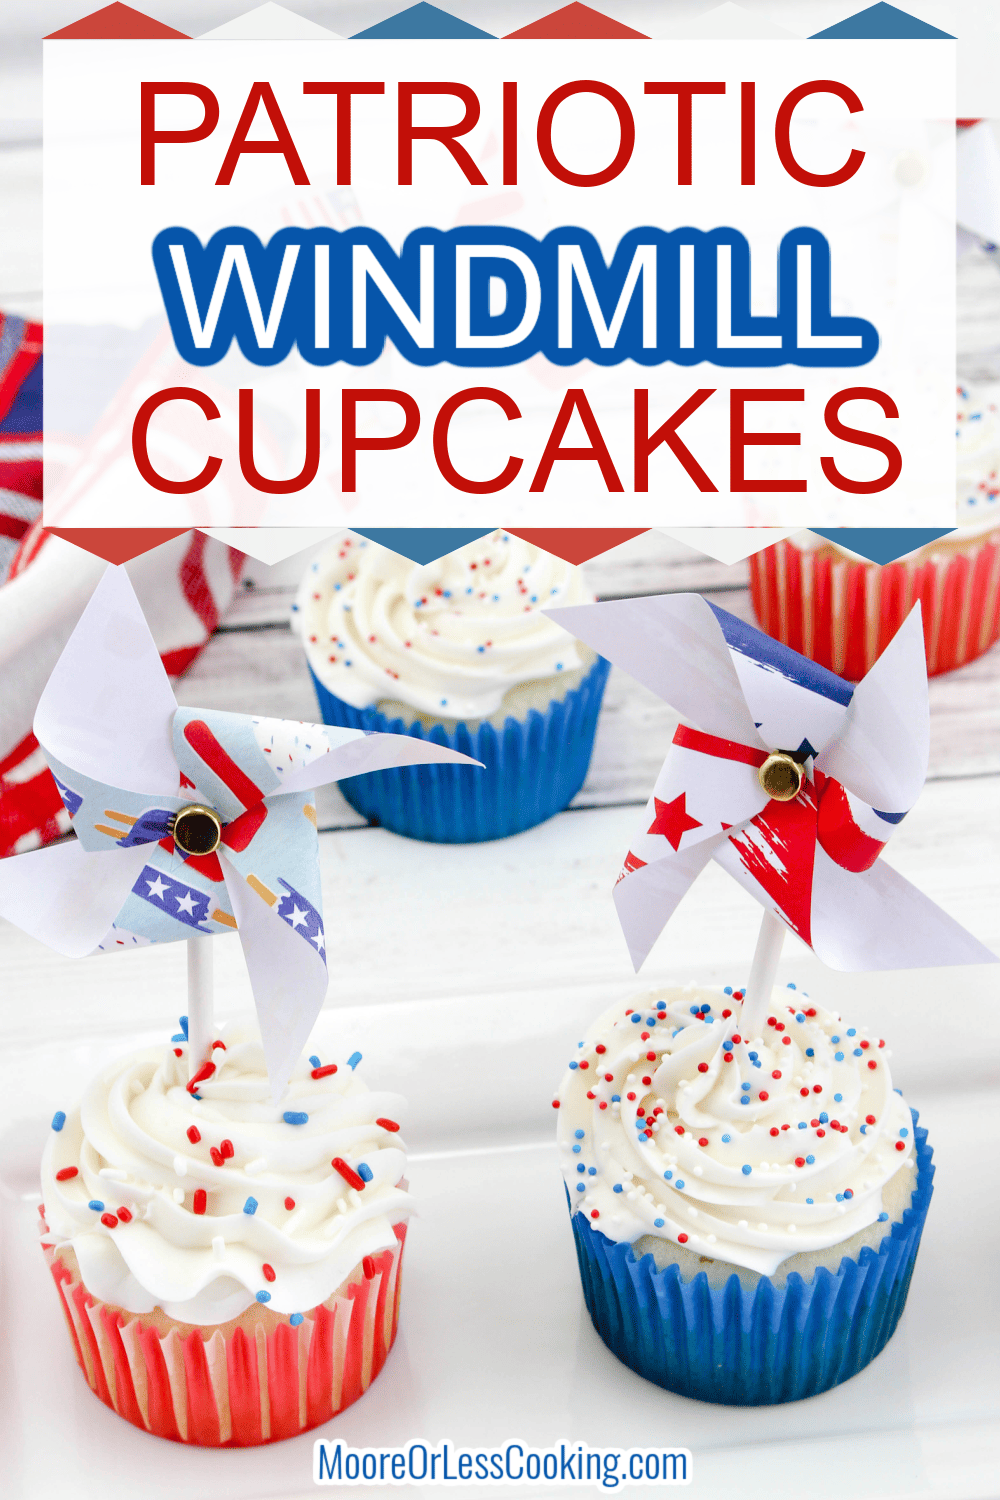 Let this red, white and blue paper topper help you celebrate the 4th of July with these easy to make Patriotic Windmill Cupcakes. These crafty windmill toppers lend a fun and festive element to these cupcakes and are a craft that the kids will love to make! via @Mooreorlesscook